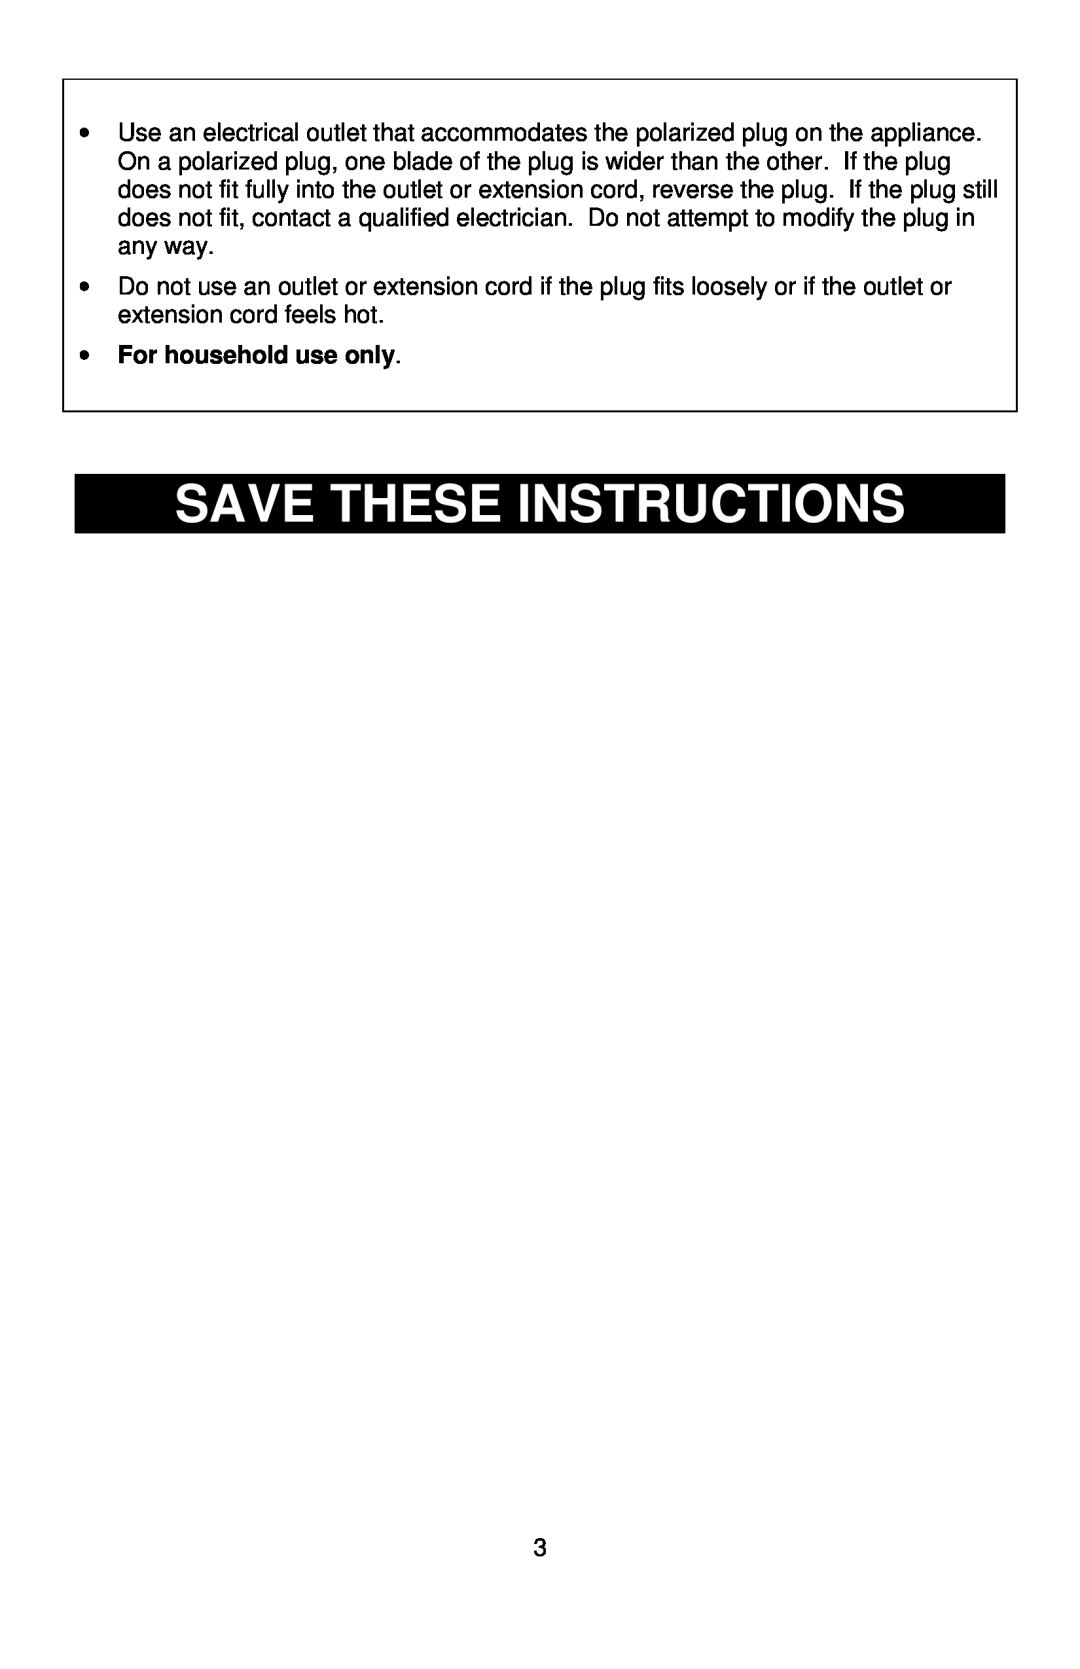 West Bend 76225, L5788 manual Save These Instructions, For household use only 